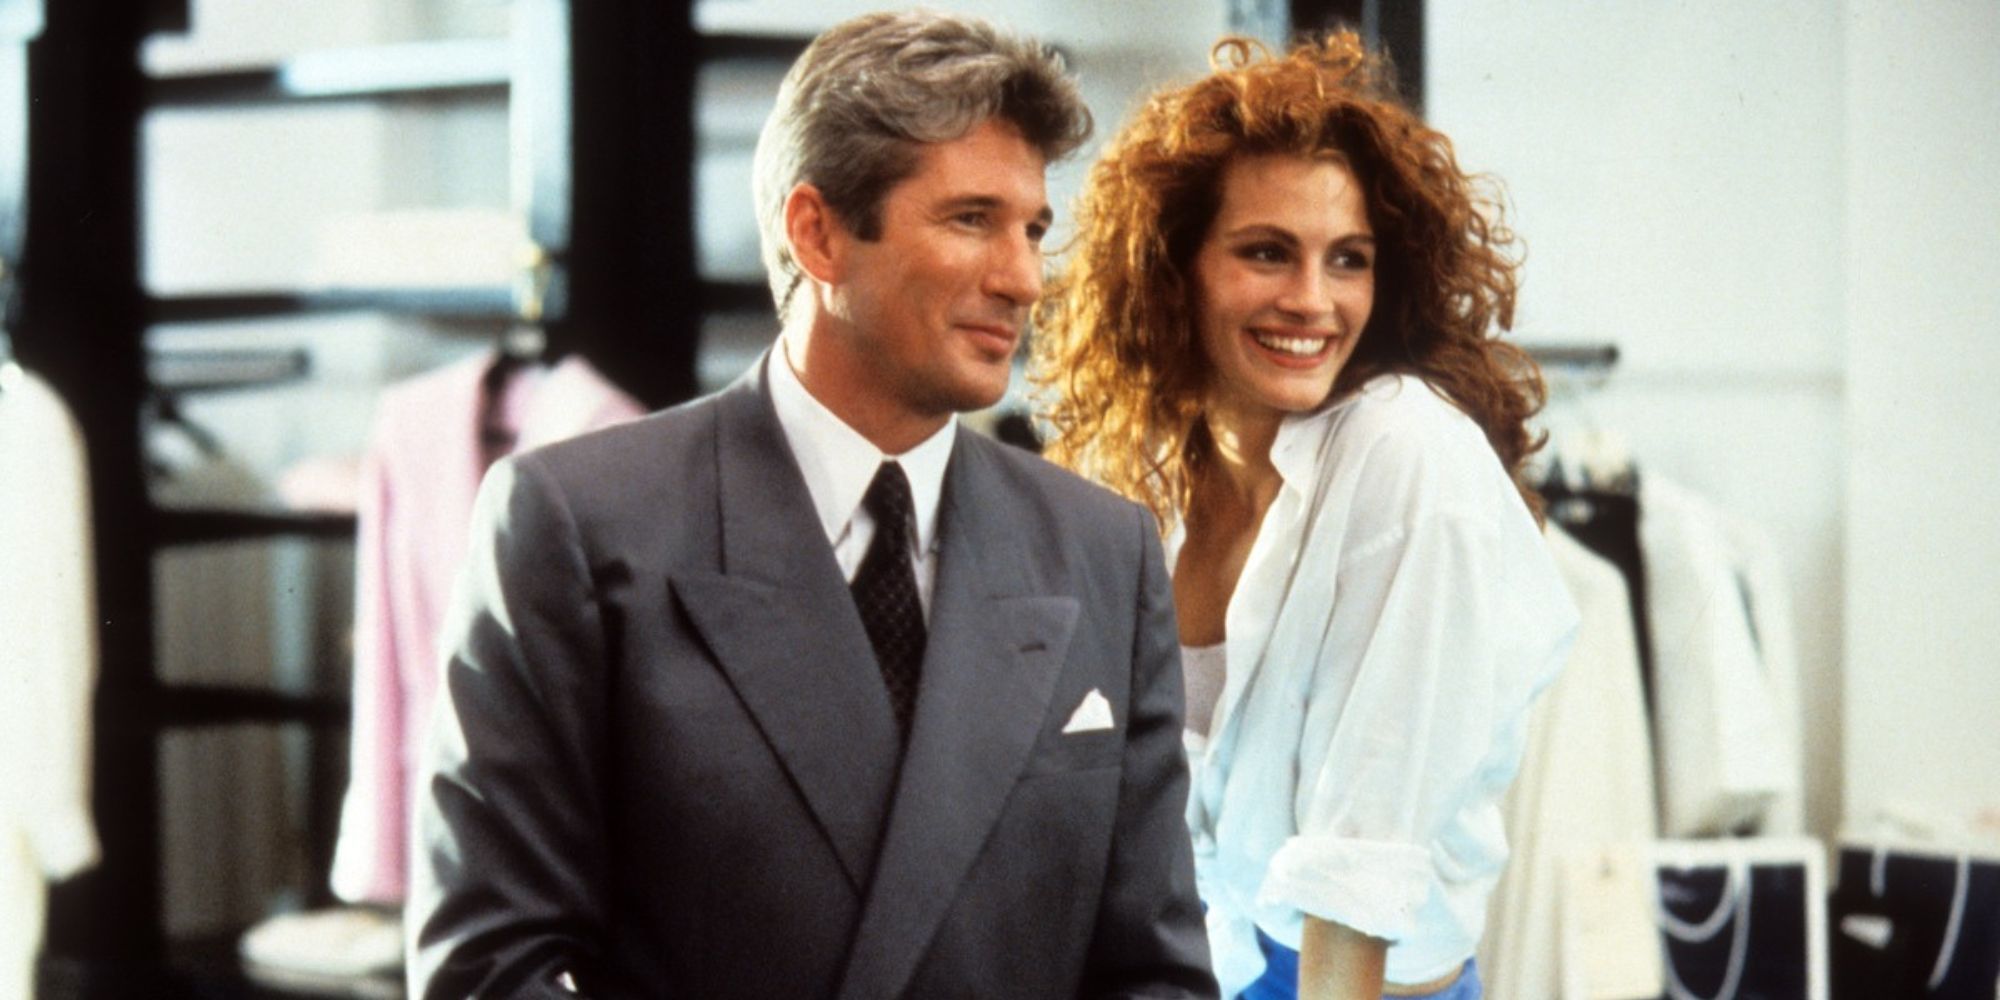 Edward and Vivian from Pretty Woman standing together